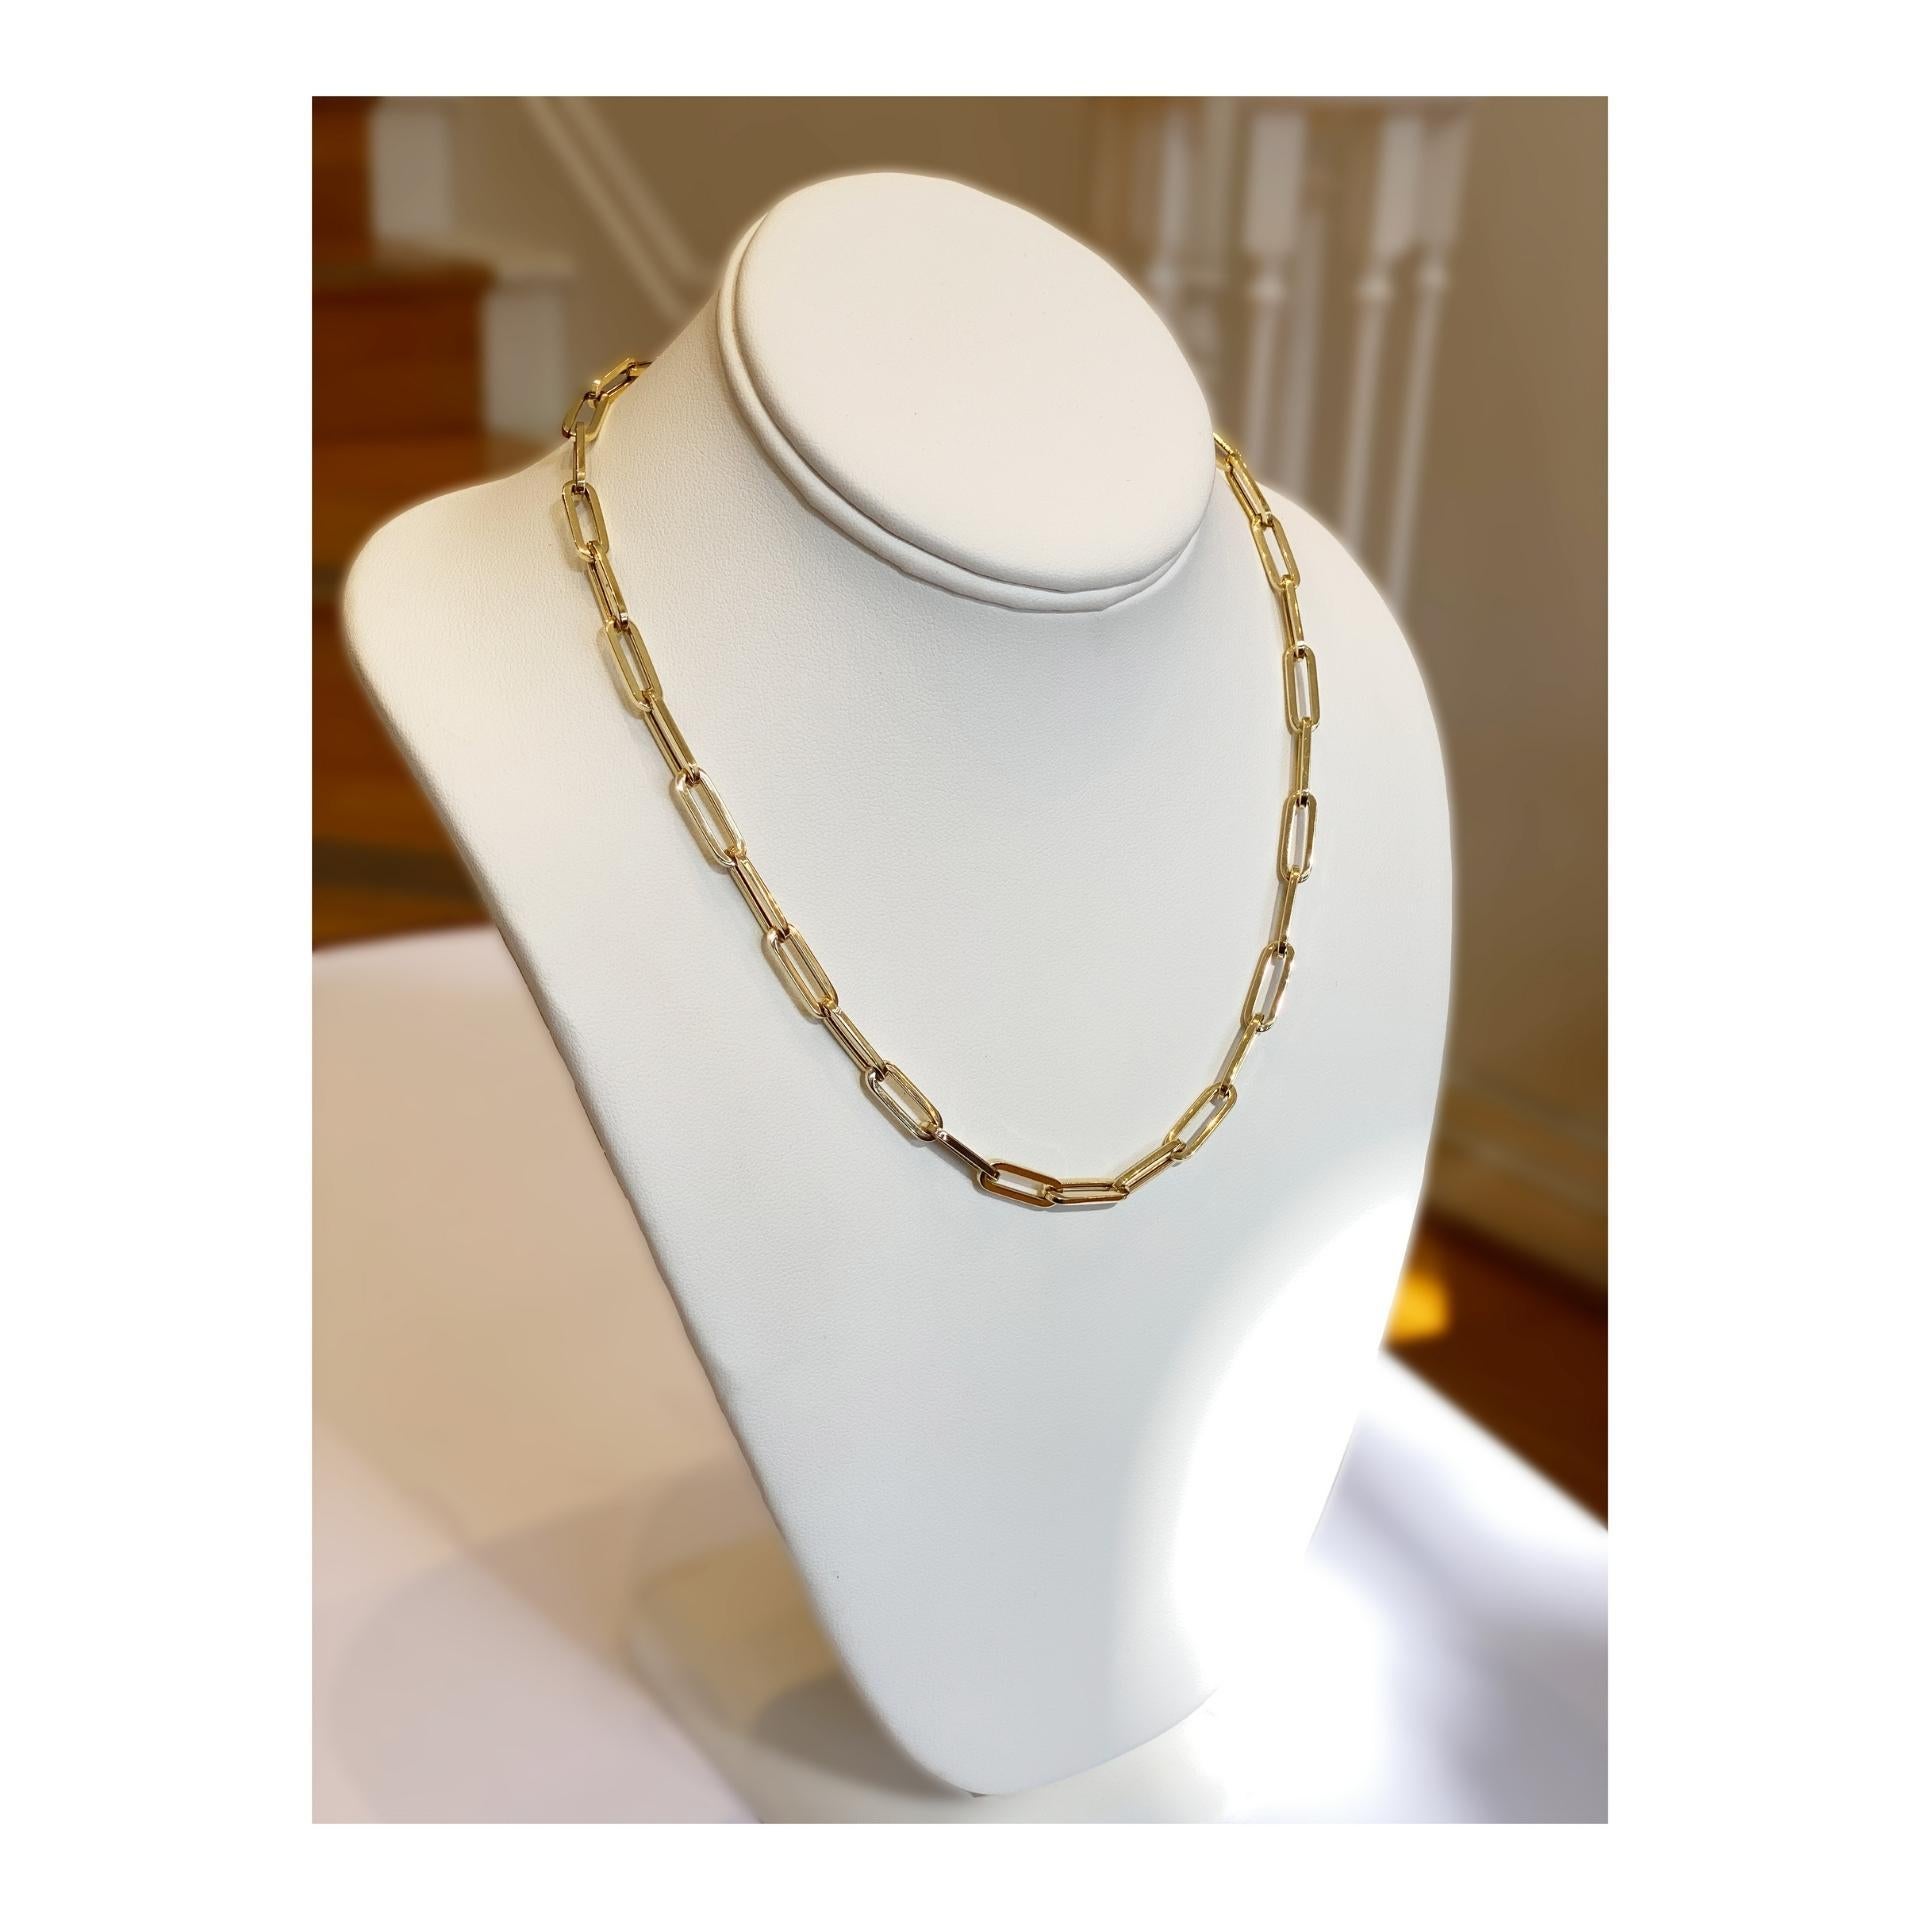 Paperclip Gold Necklace 5.30mm in 14K Yellow Gold 18 inches

Set in 14K Yellow Gold

Length: 18.0 inches

Width of Paperclip: 5.30 mm

Weight: 11.40 grams

Stock #: J5749

ALSO AVAILABLE IN 16